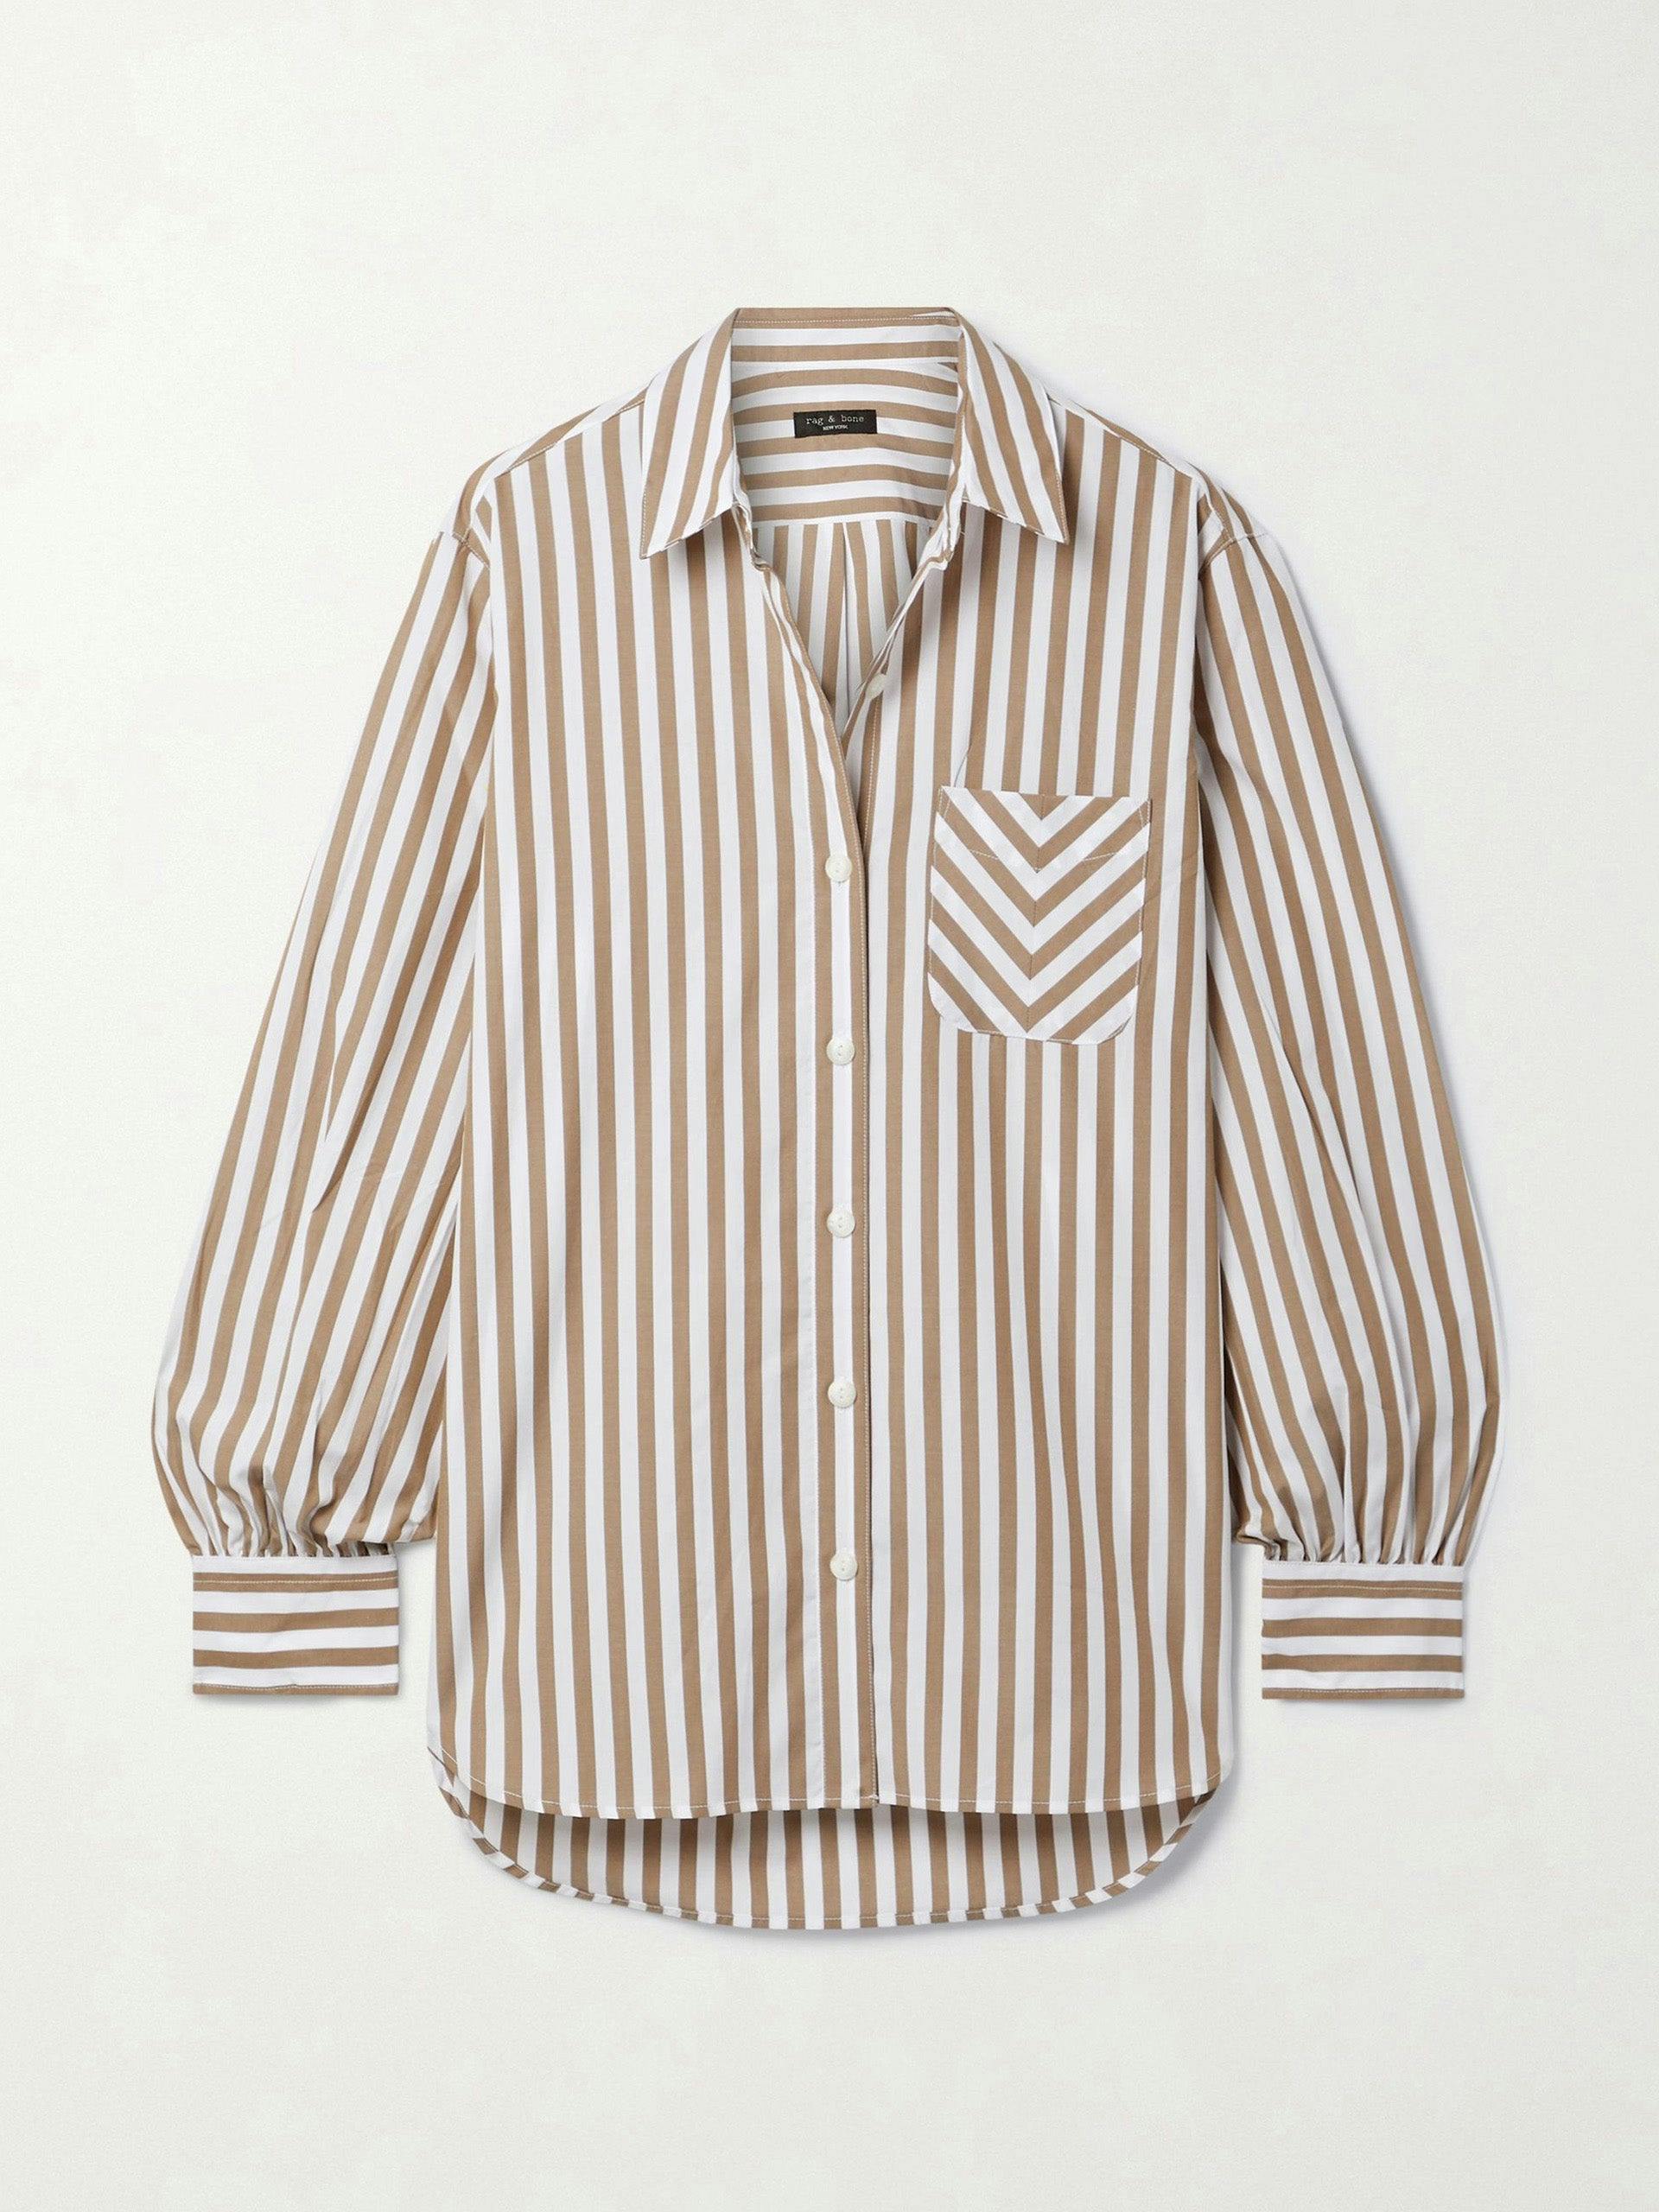 White and brown striped shirt